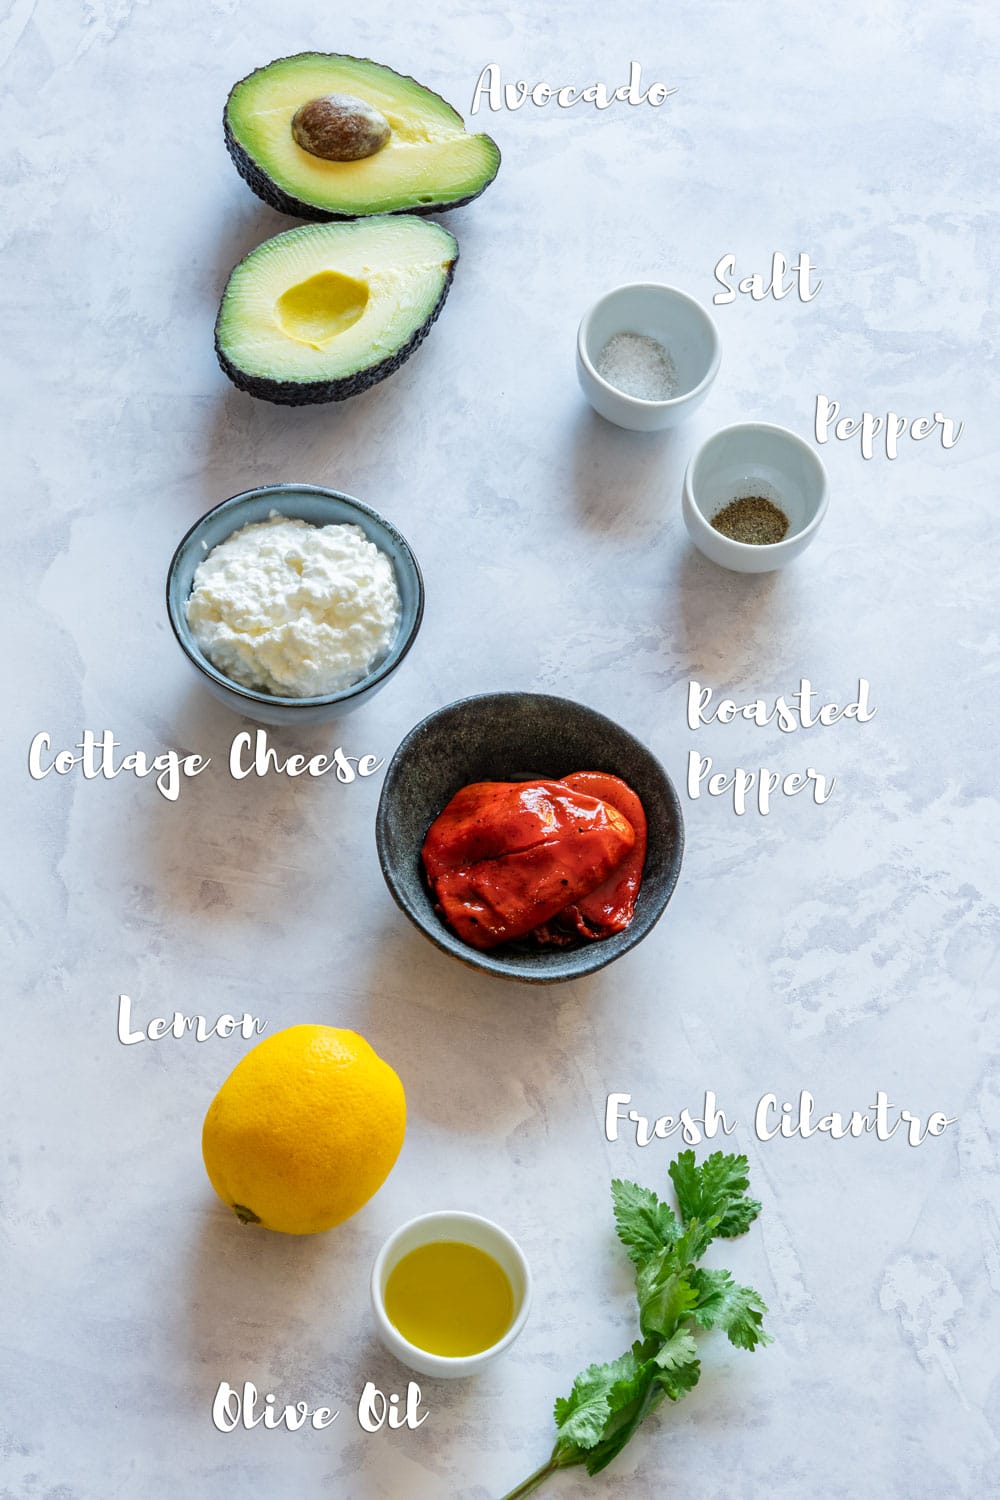 Ingredients of cottage cheese dip - cottage cheese, avocado, roasted pepper, cilantro, olive oil and seasoning.